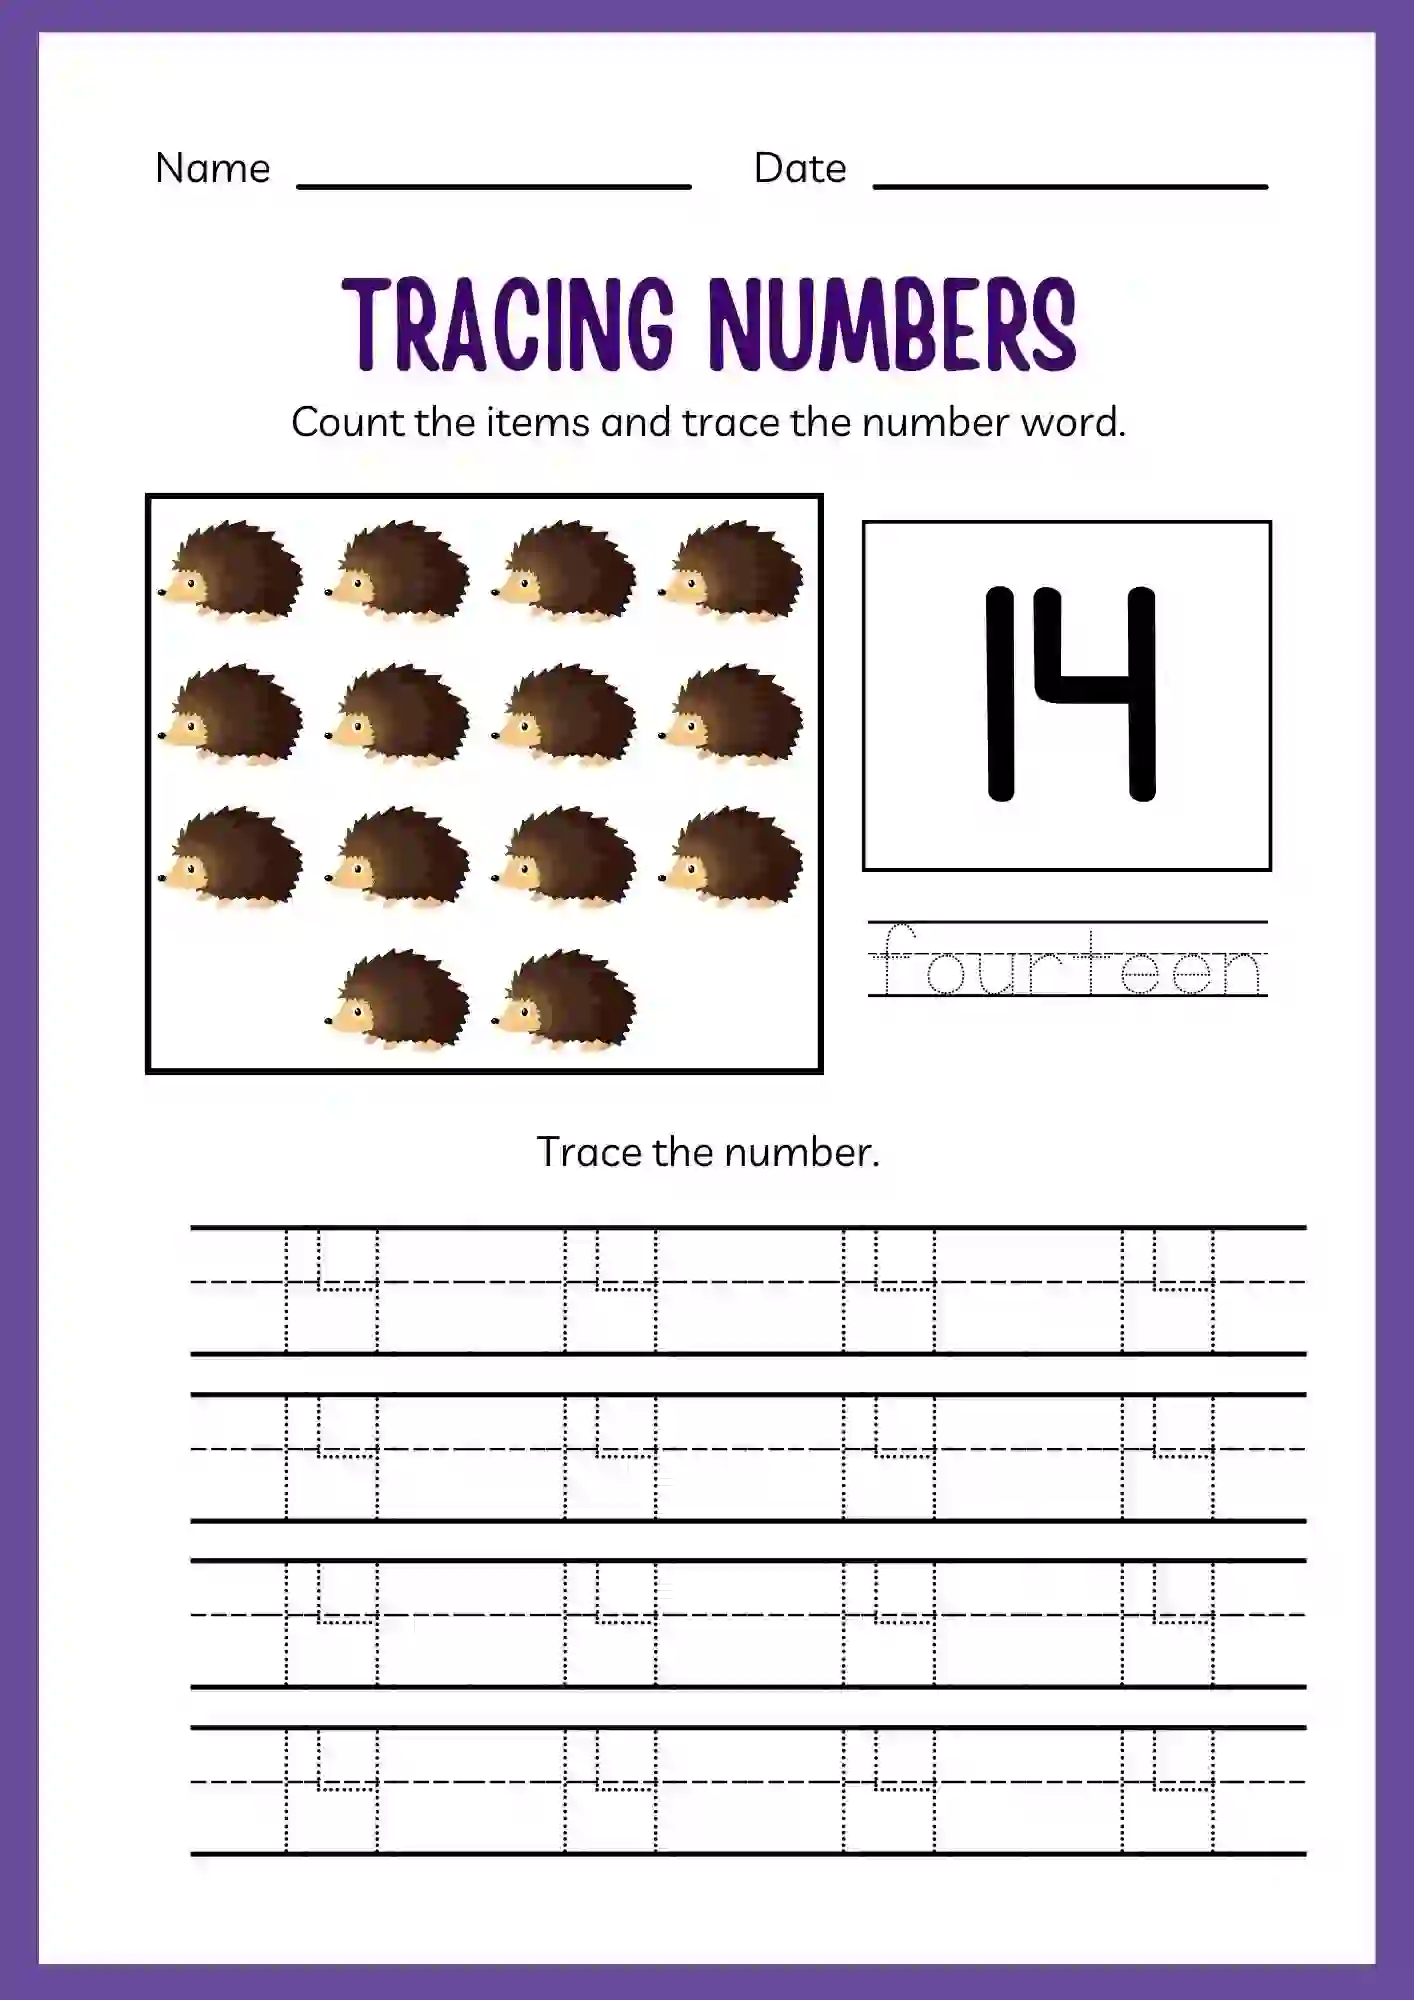 Number Tracing Worksheets 1 to 20 (Number 14 tracing sheet)